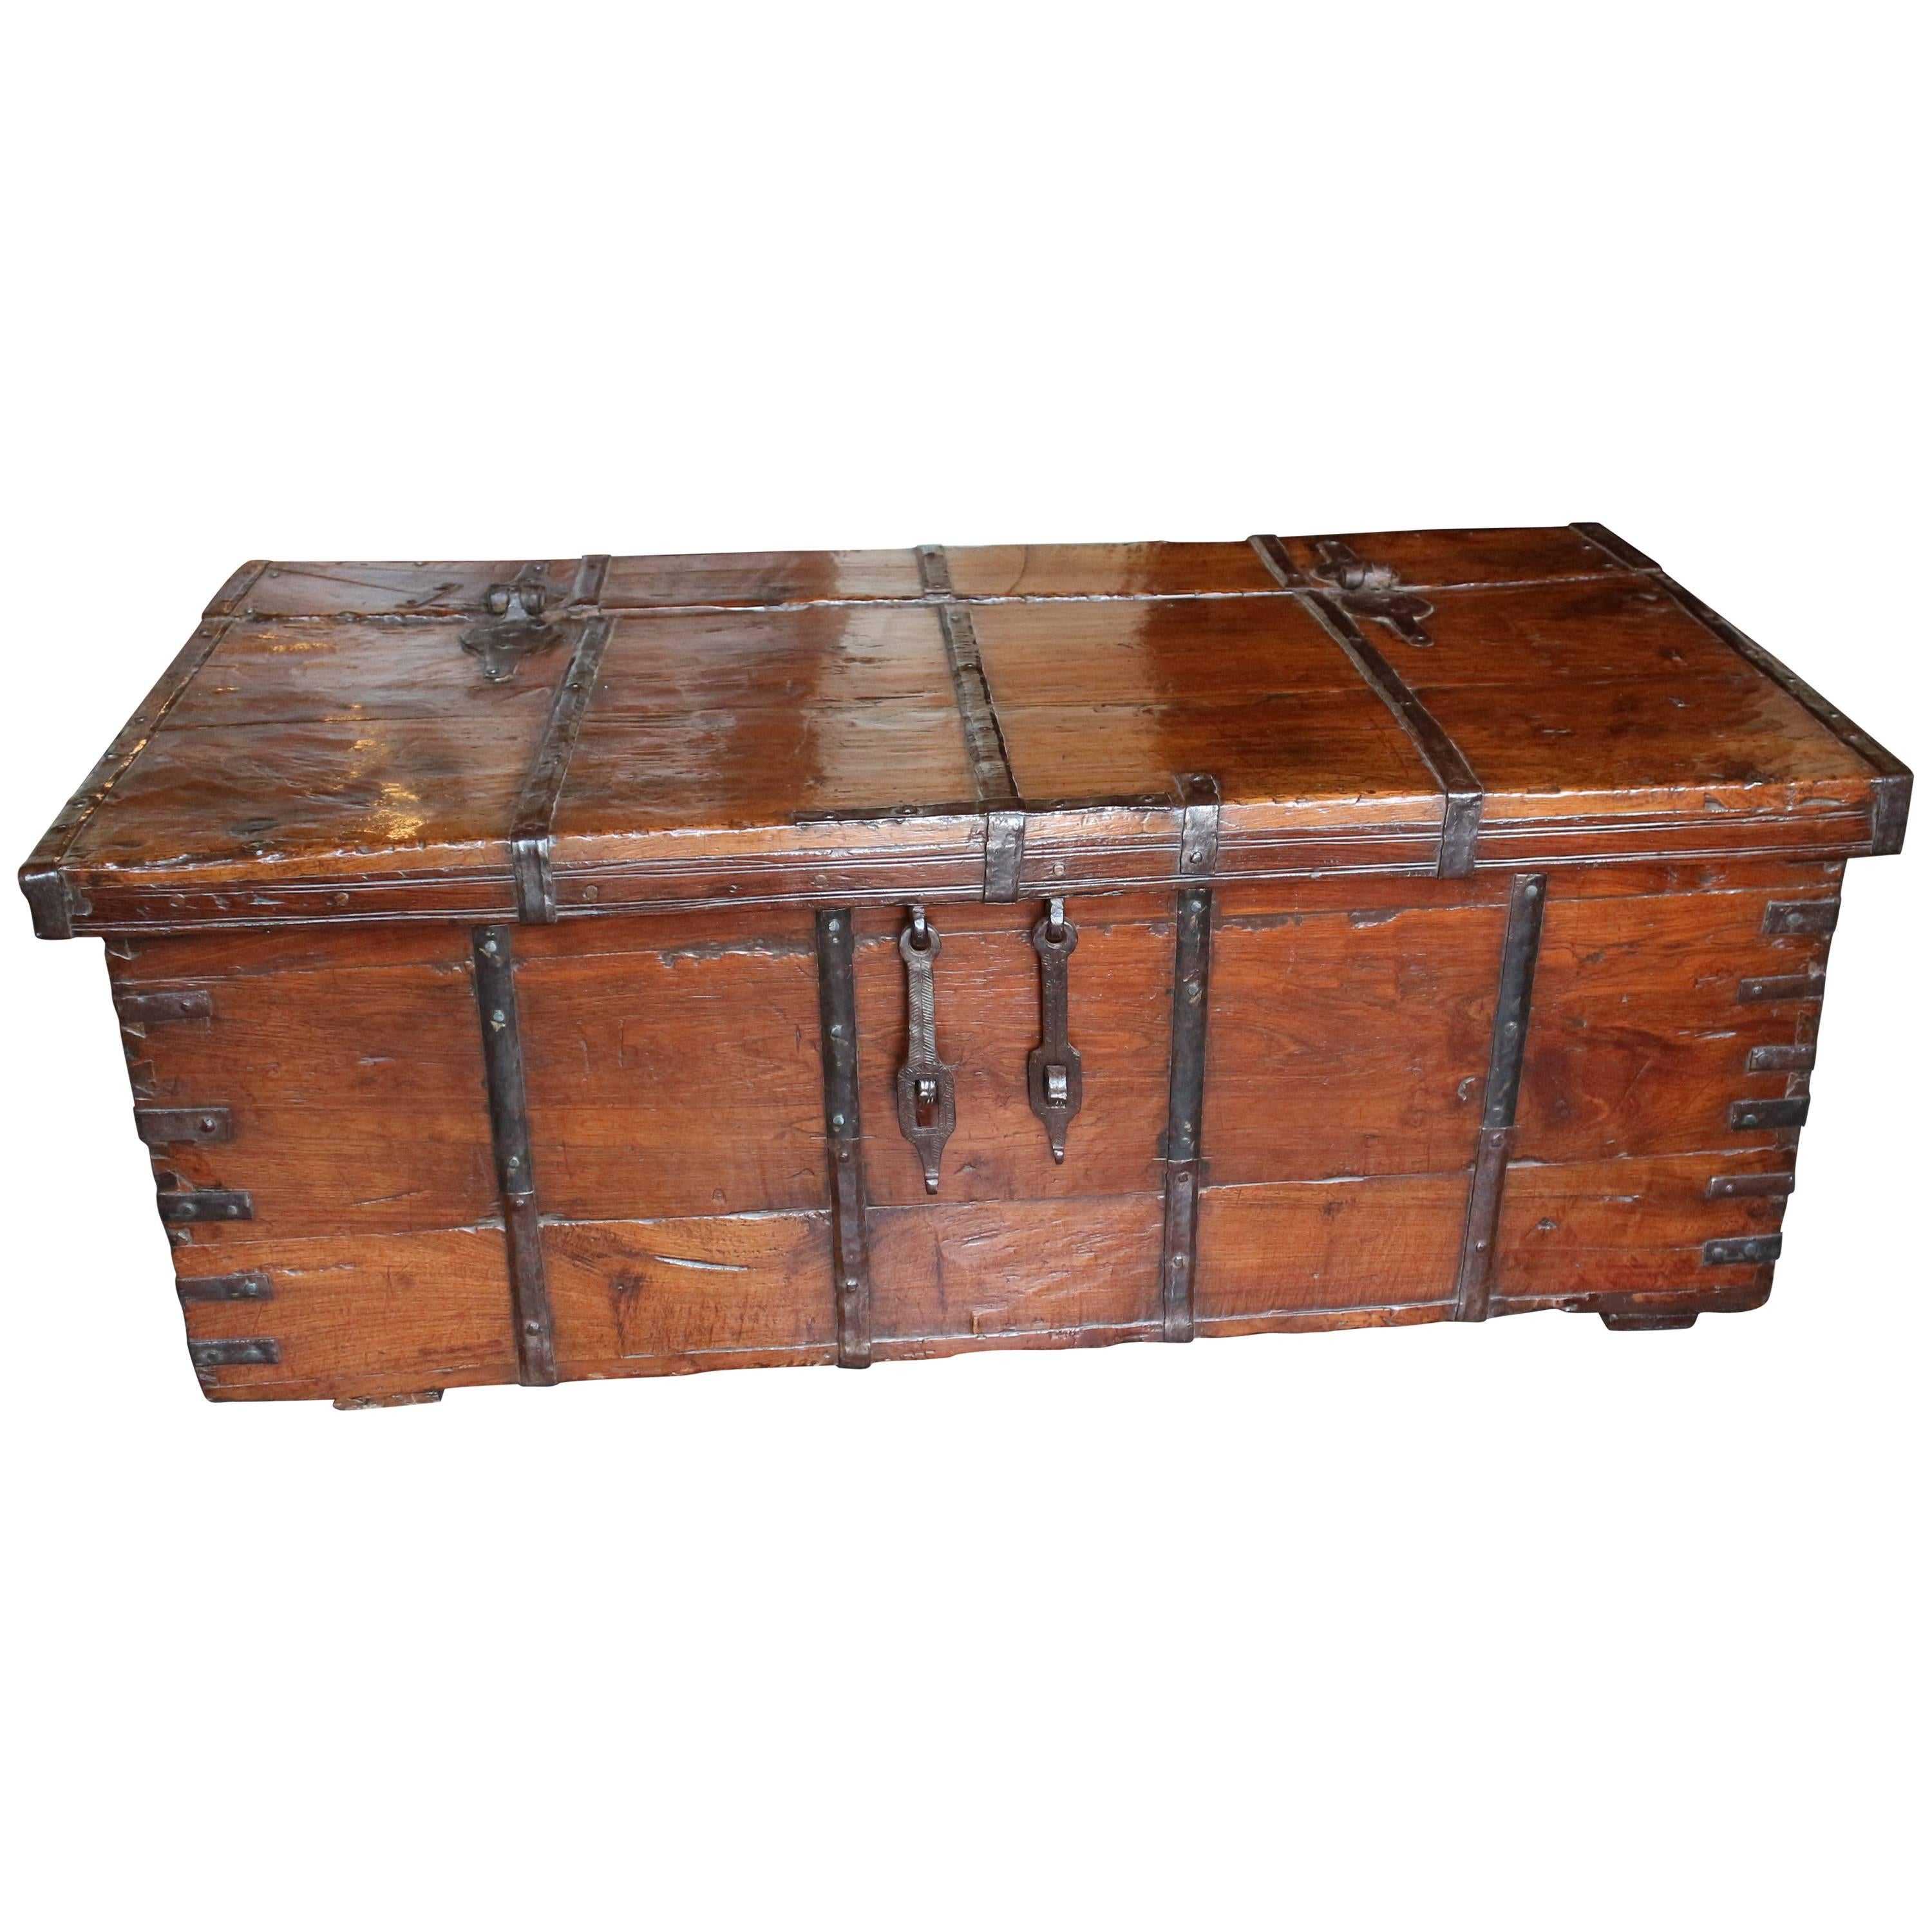 19th Century Anglo-Indian Teakwood Box or Coffee Table